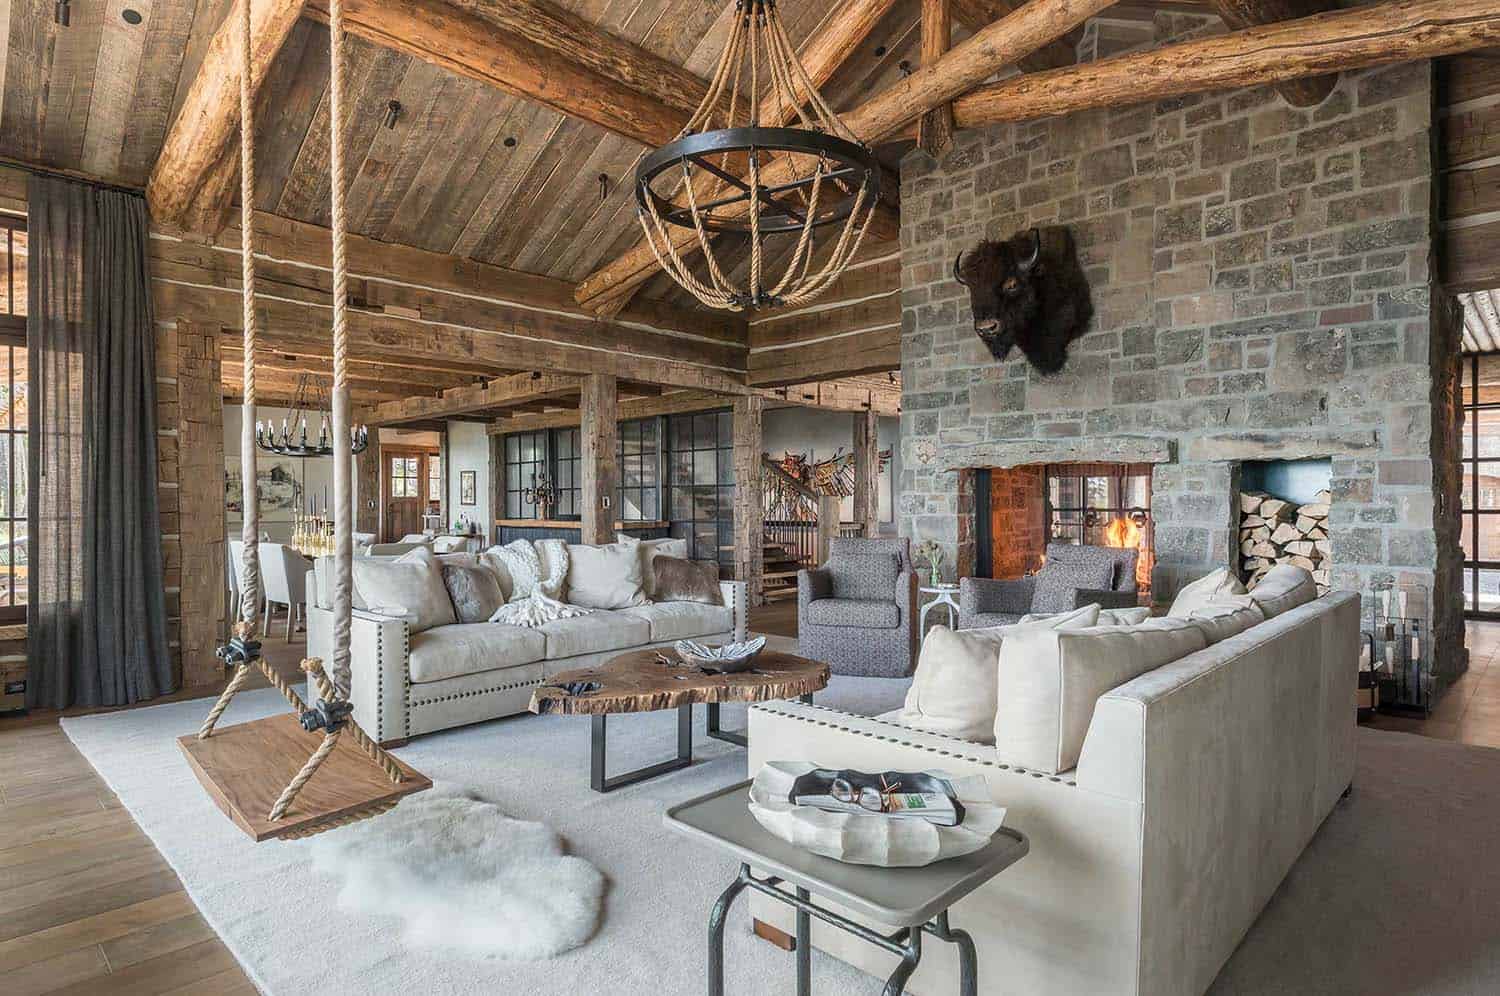 A rustic chic family hideaway in Big Sky: Freedom Lodge